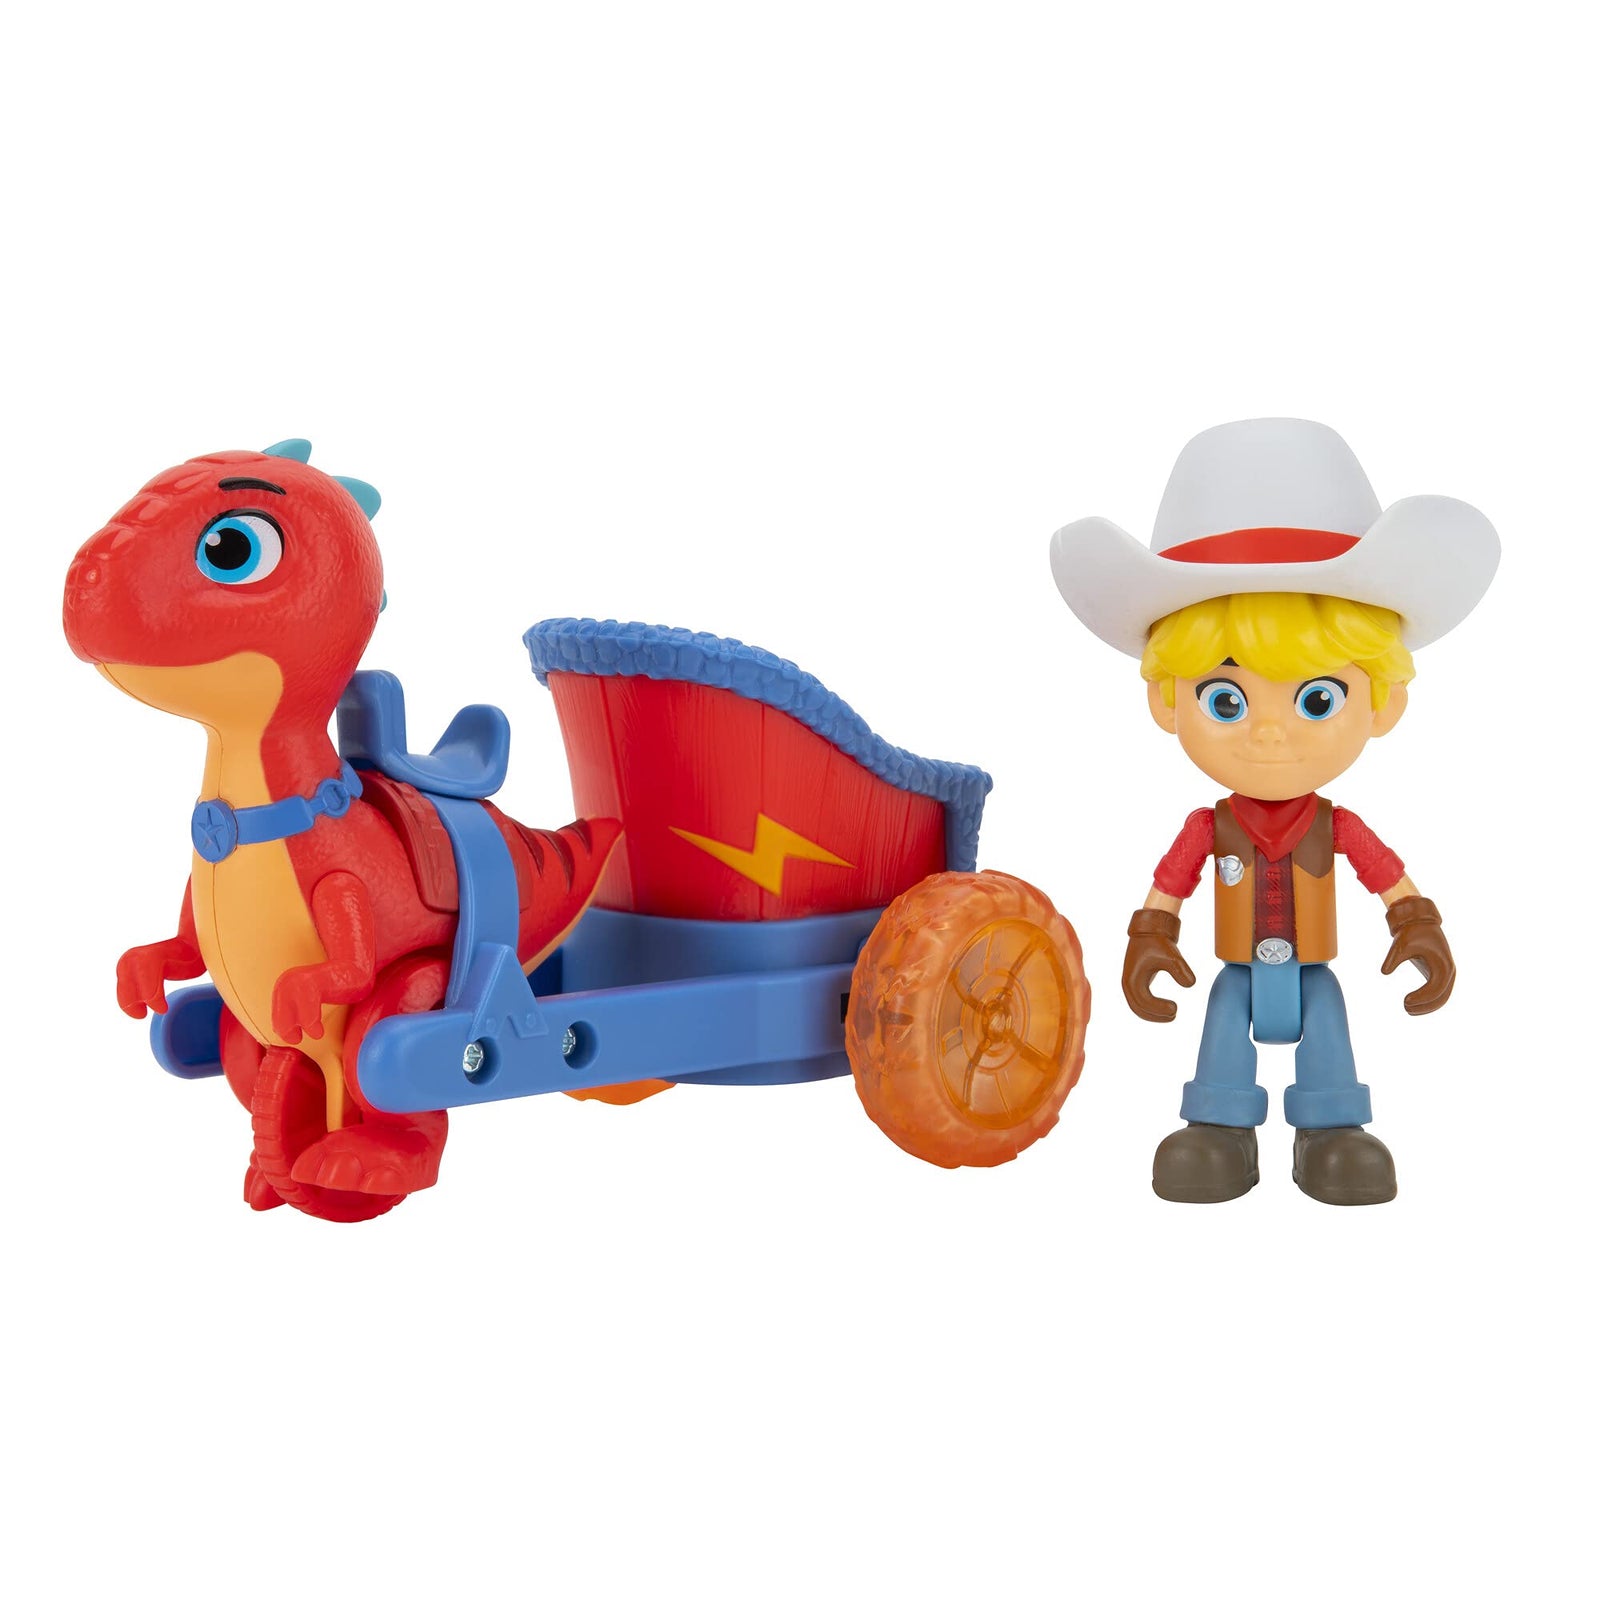 Dino Ranch Jon and Blitz Chariot Vehicle - Features Pull Back 5” Dino Blitz Chariot & 3” Dino Rancher Jon - Three Styles to Collect - Toys for Kids Featuring Your Favorite Pre-Westoric Ranchers